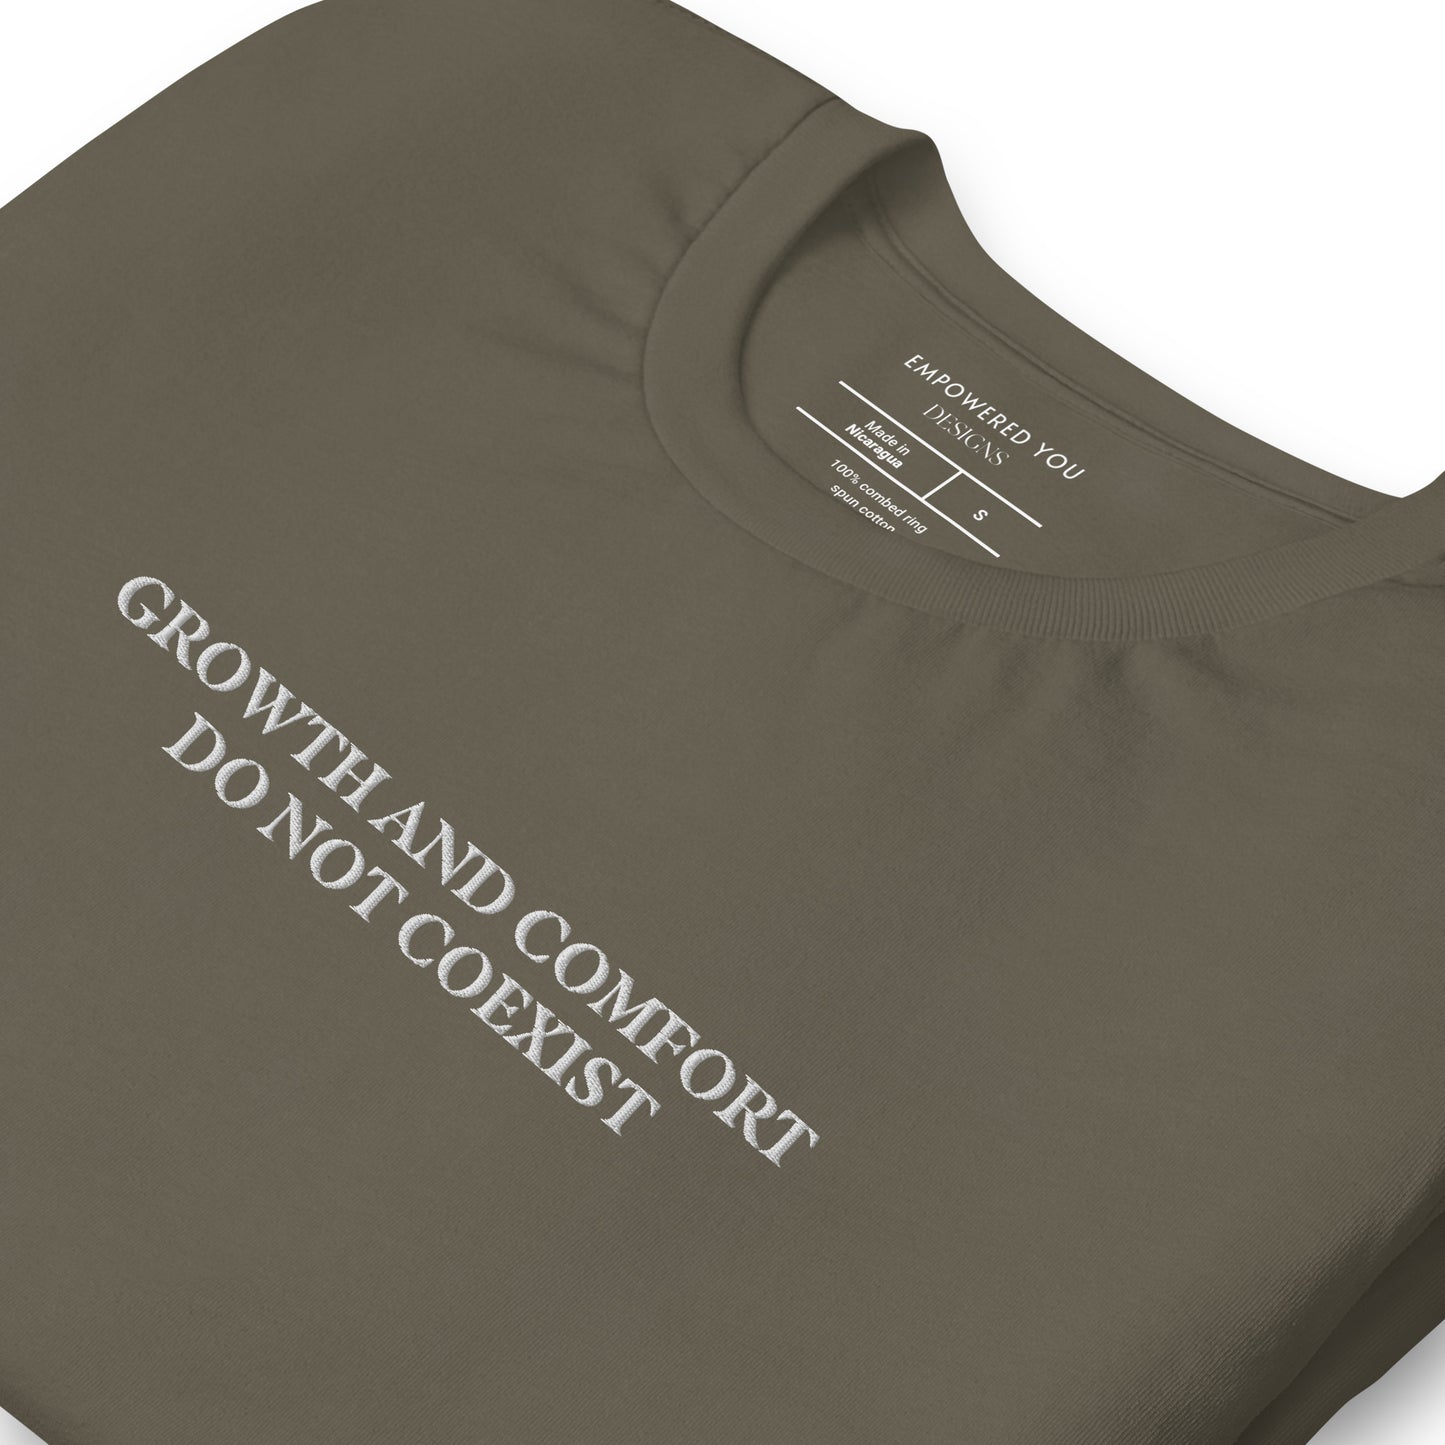 "GROWTH AND COMFORT DO NOT COEXIST" Embroidered T-Shirt